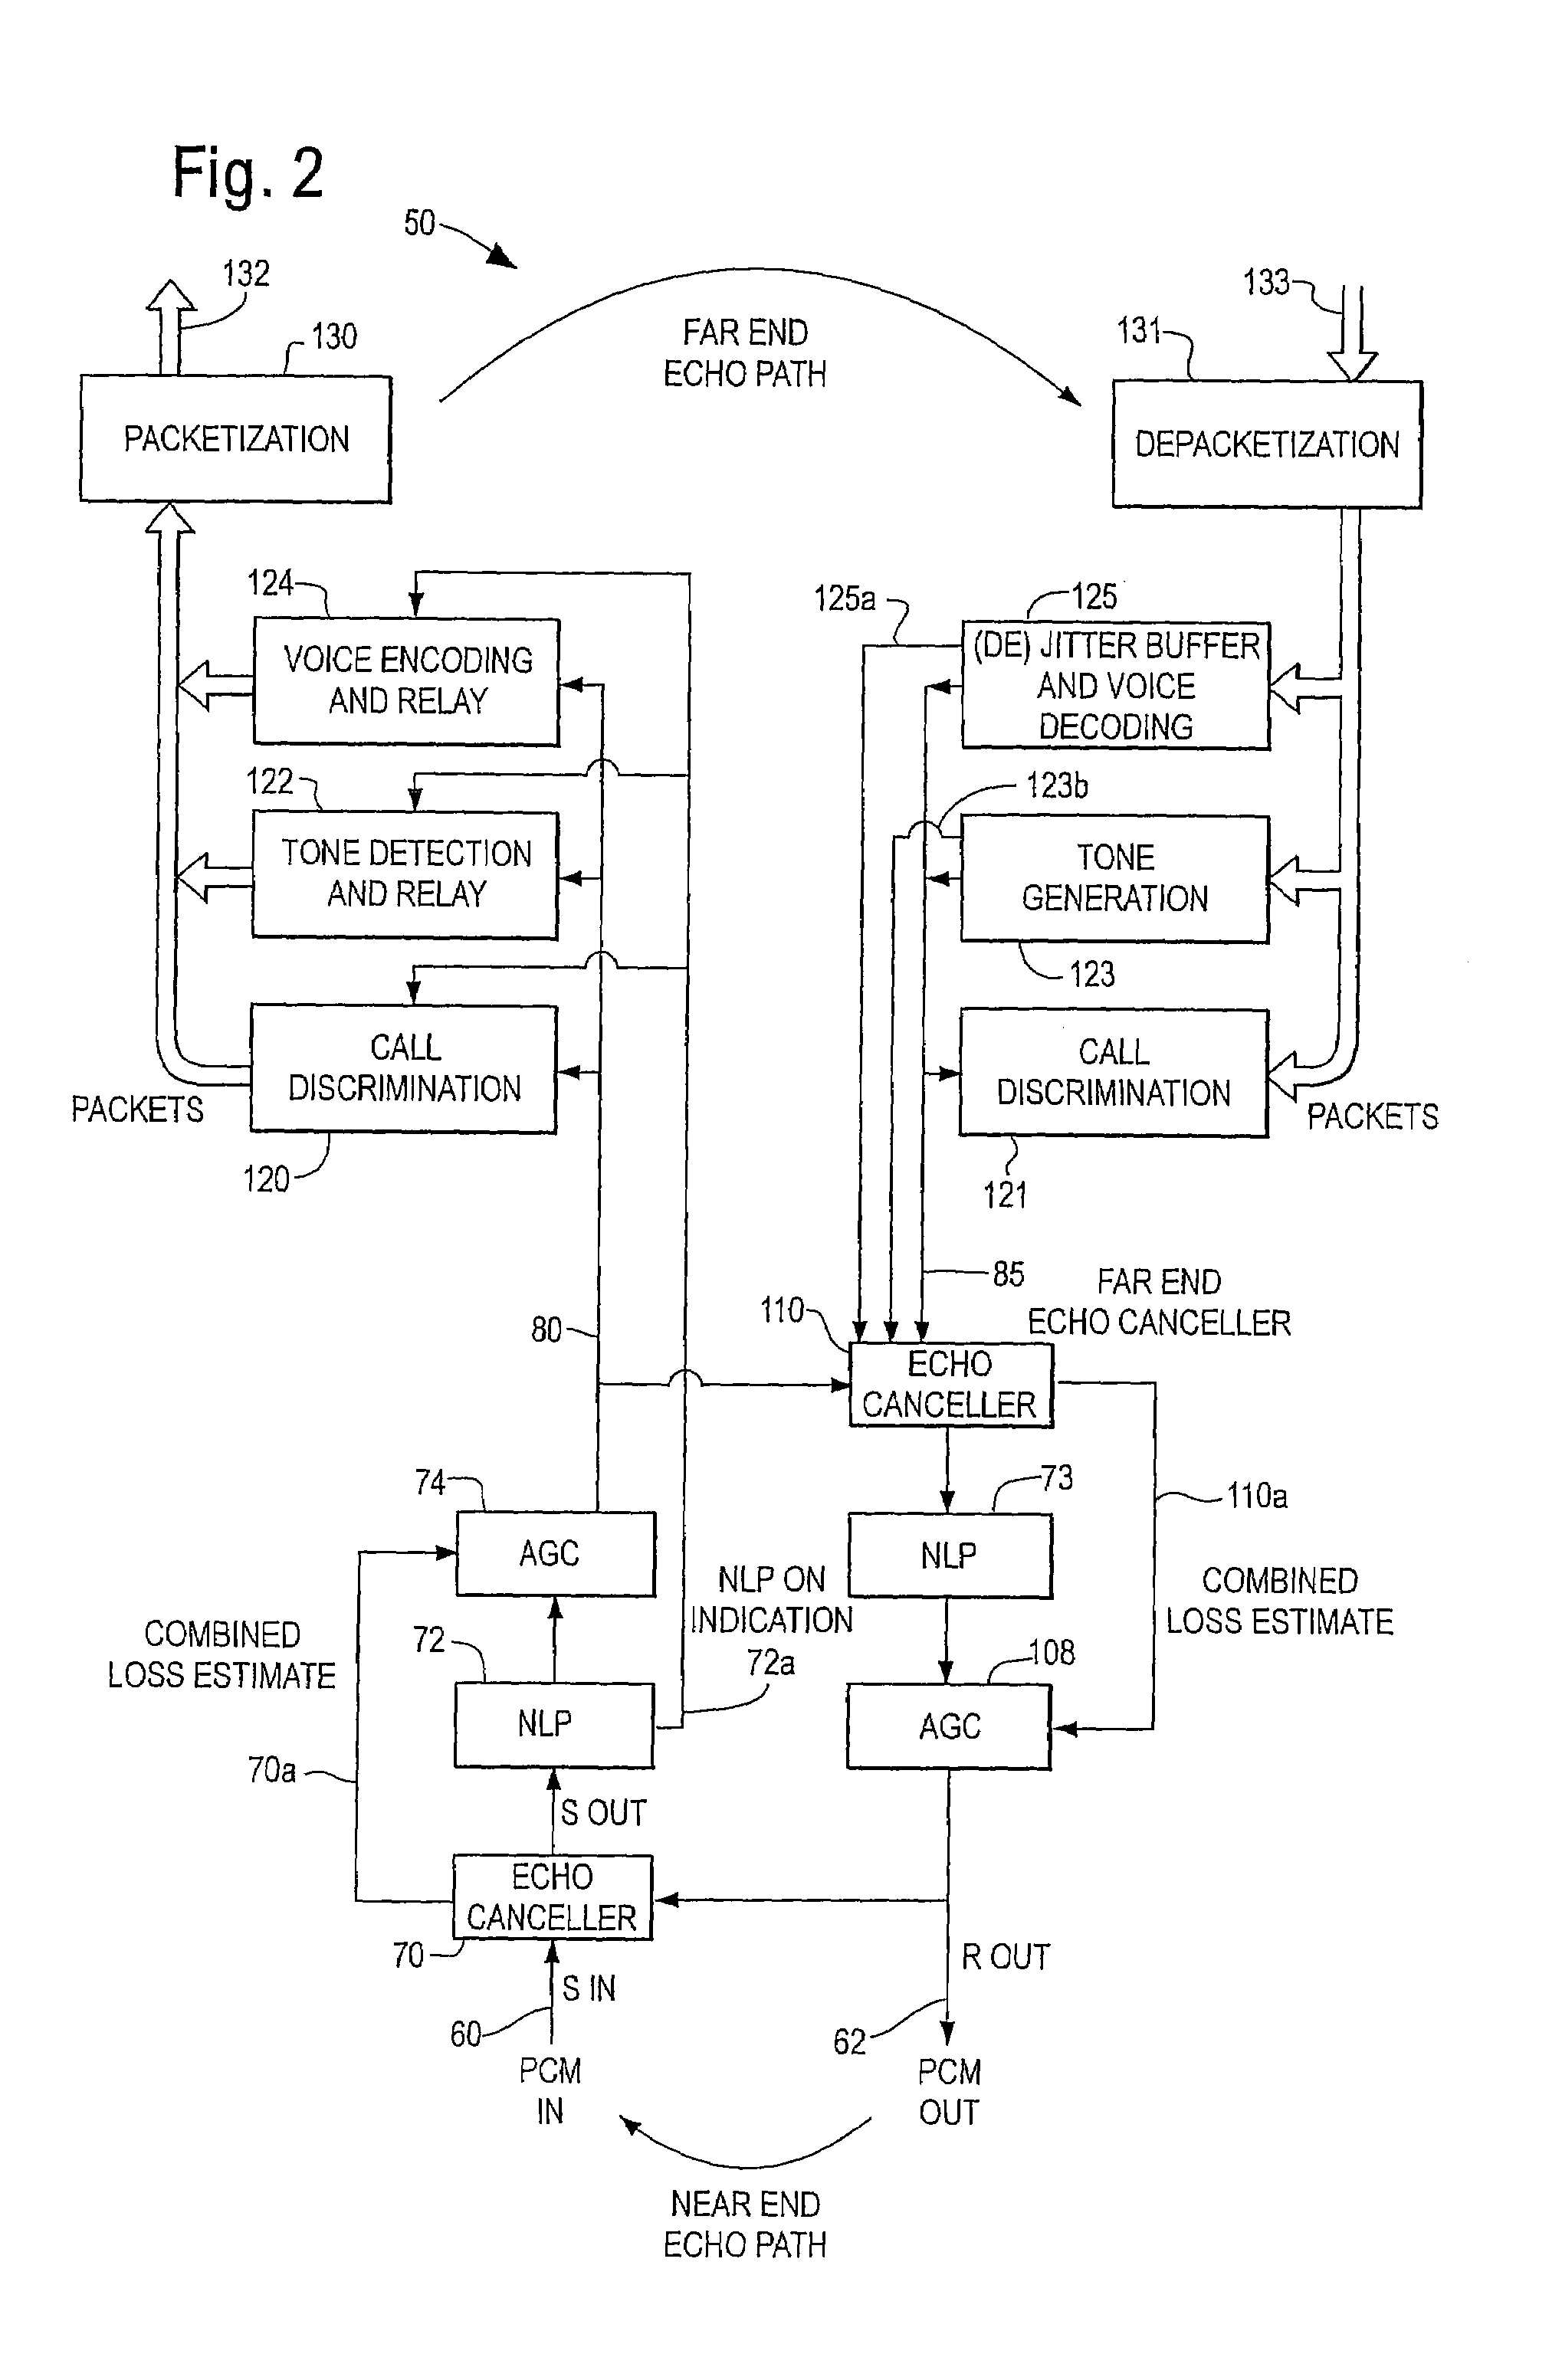 System and method for operating a packet voice far-end echo cancellation system